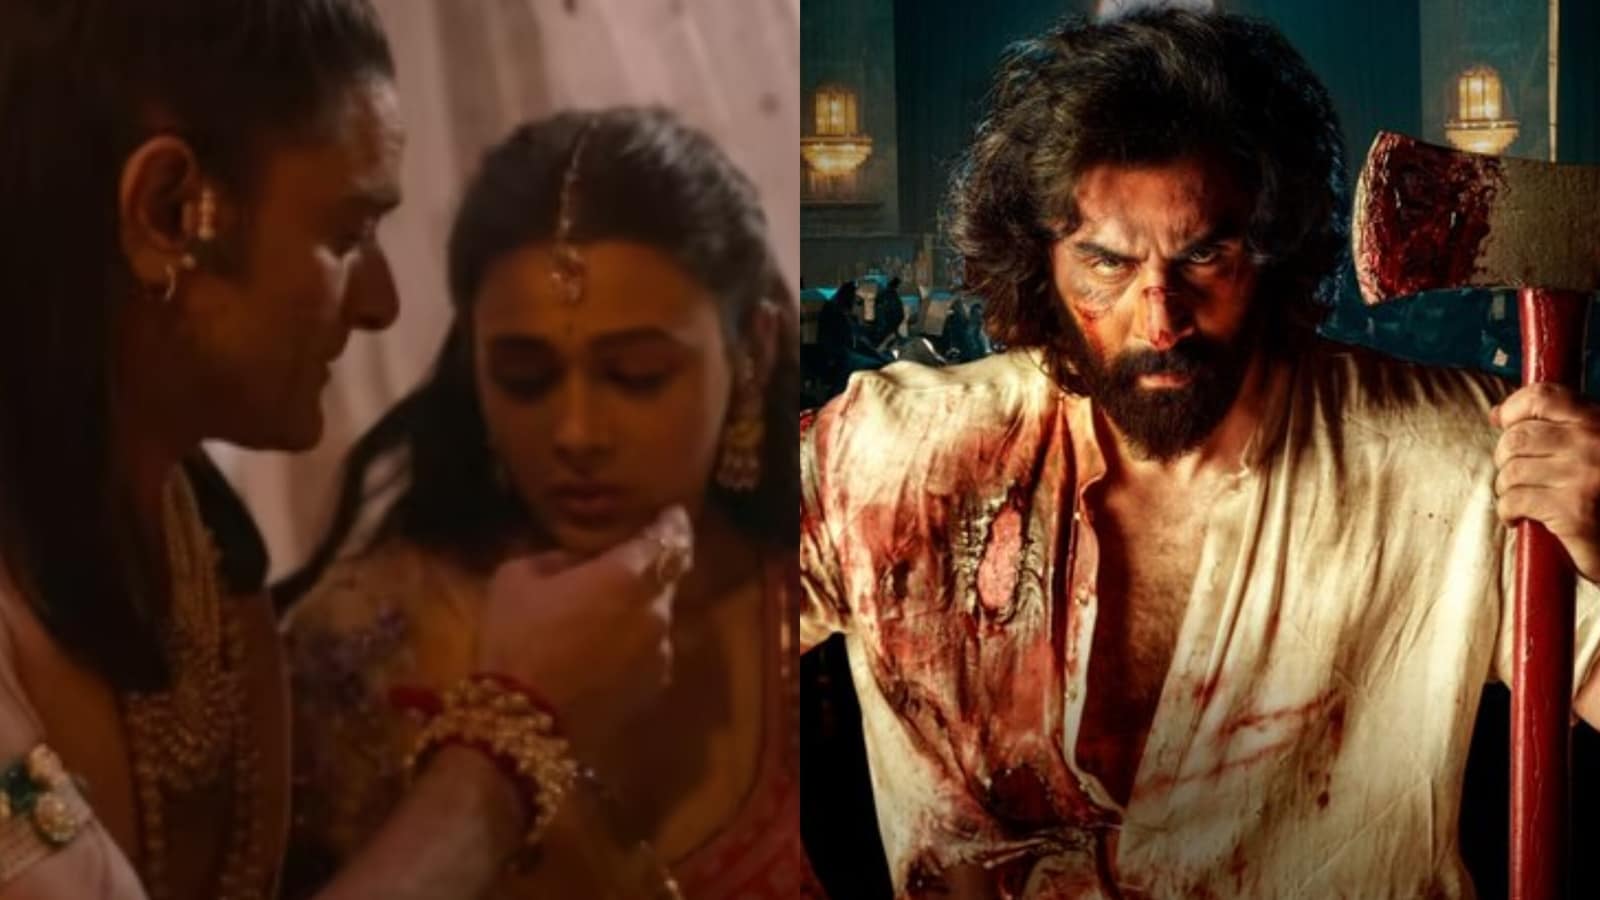 From Maharaj's charan seva to Animal's 'lick my shoe': Most controversial Bollywood scenes in recent times